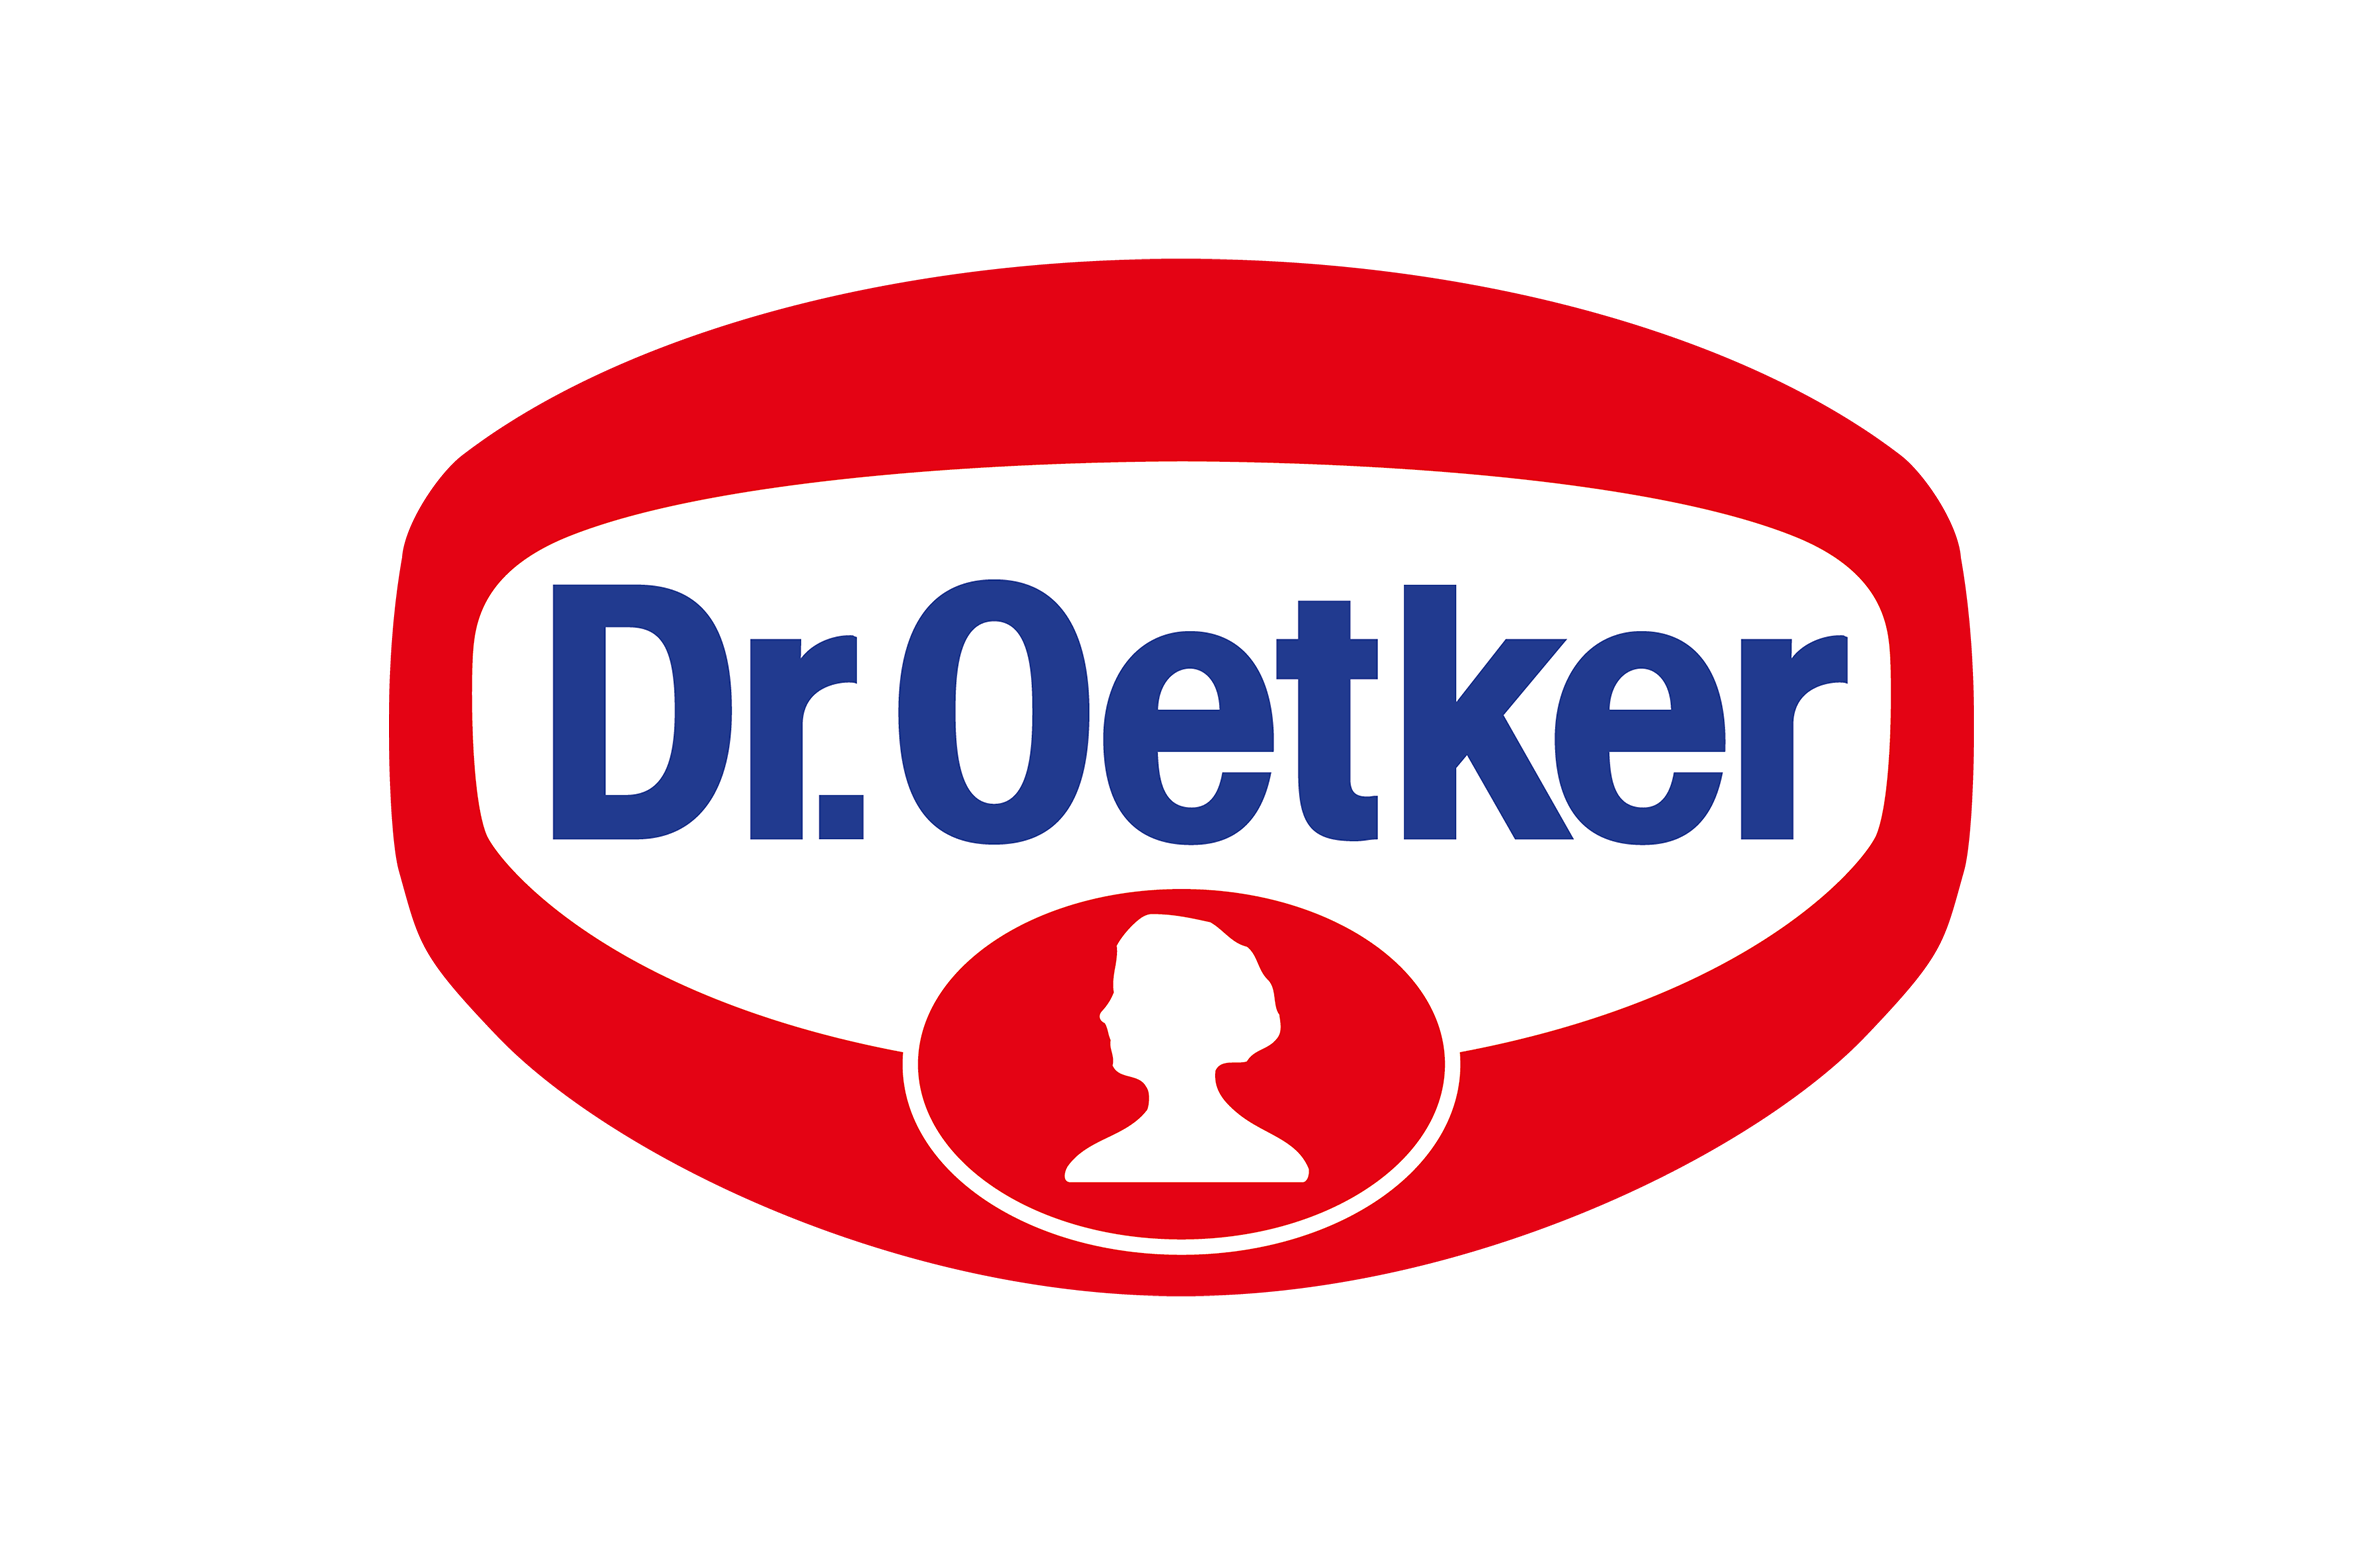 Dr. Oetker sets the course for the future